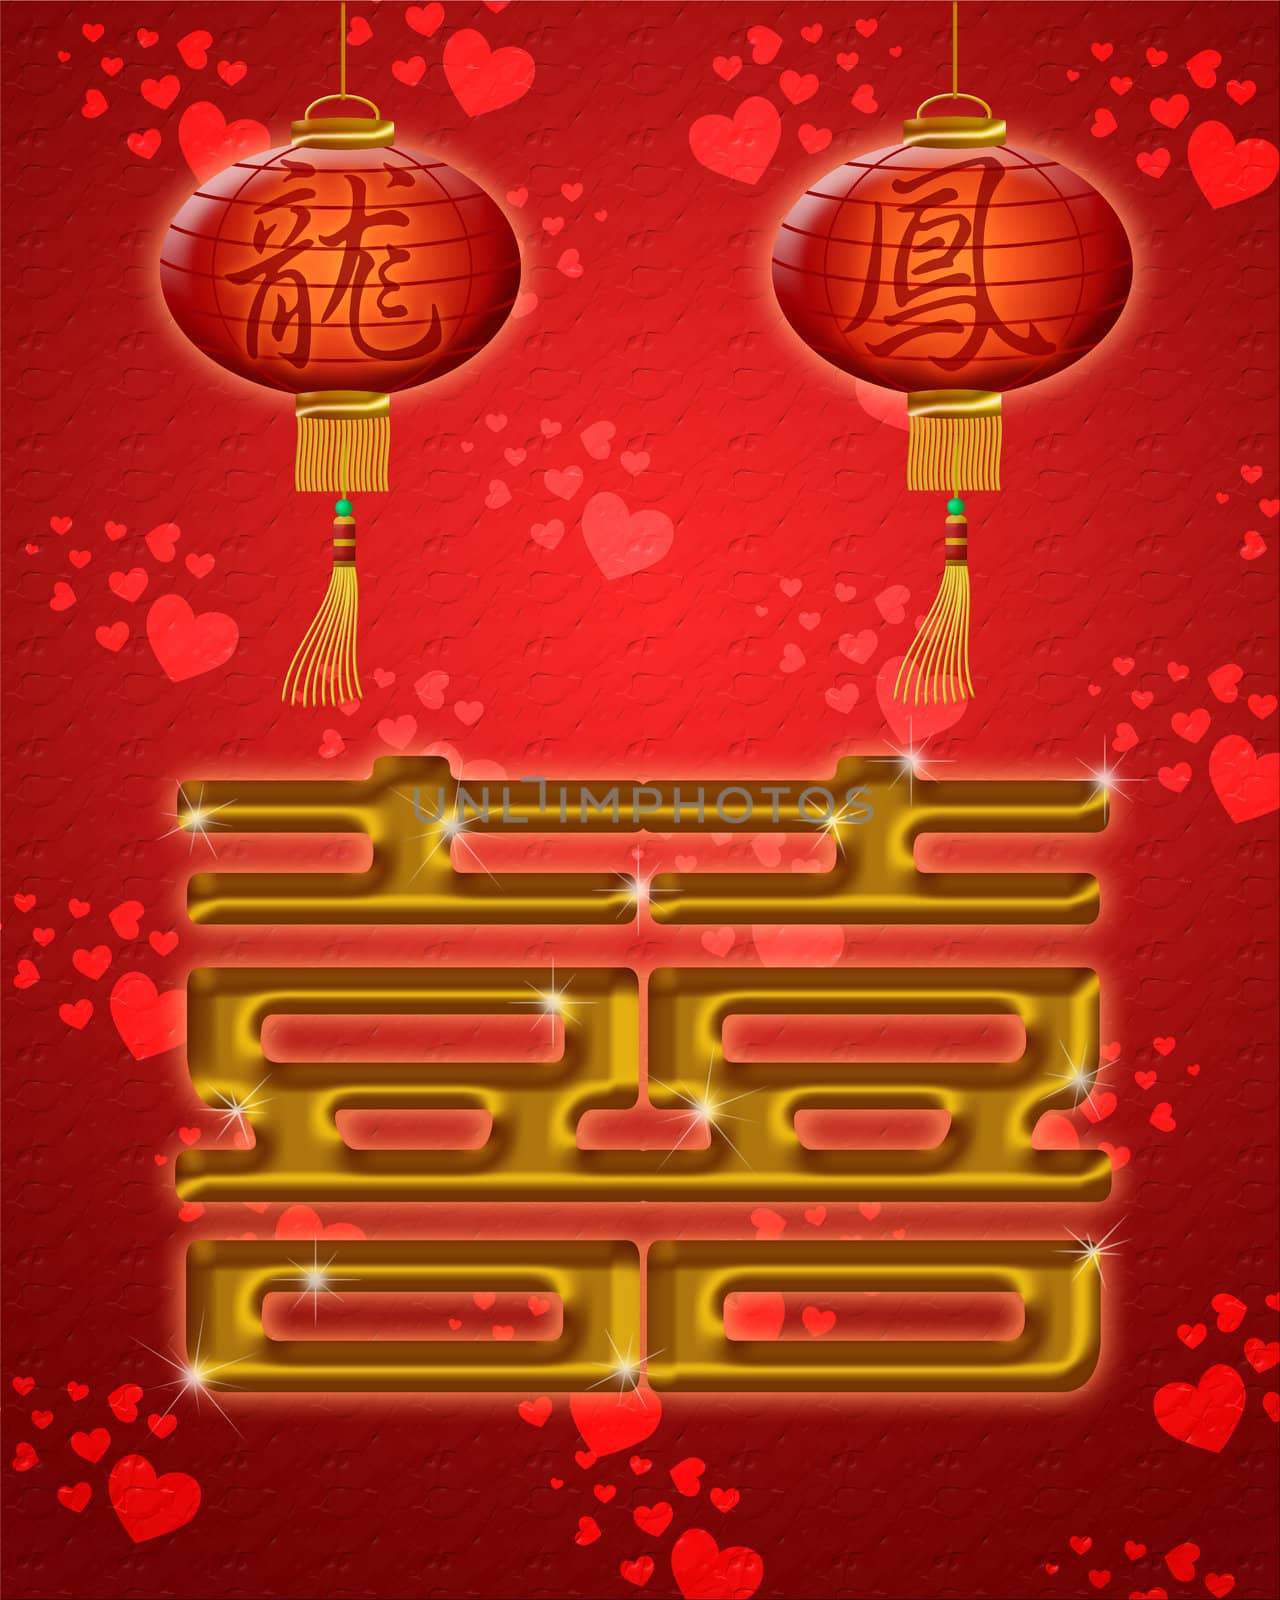 Chinese Wedding Double Happiness Symbol with Dragon and Pheonix Text on Lanterns over Red Hearts Background Illustration